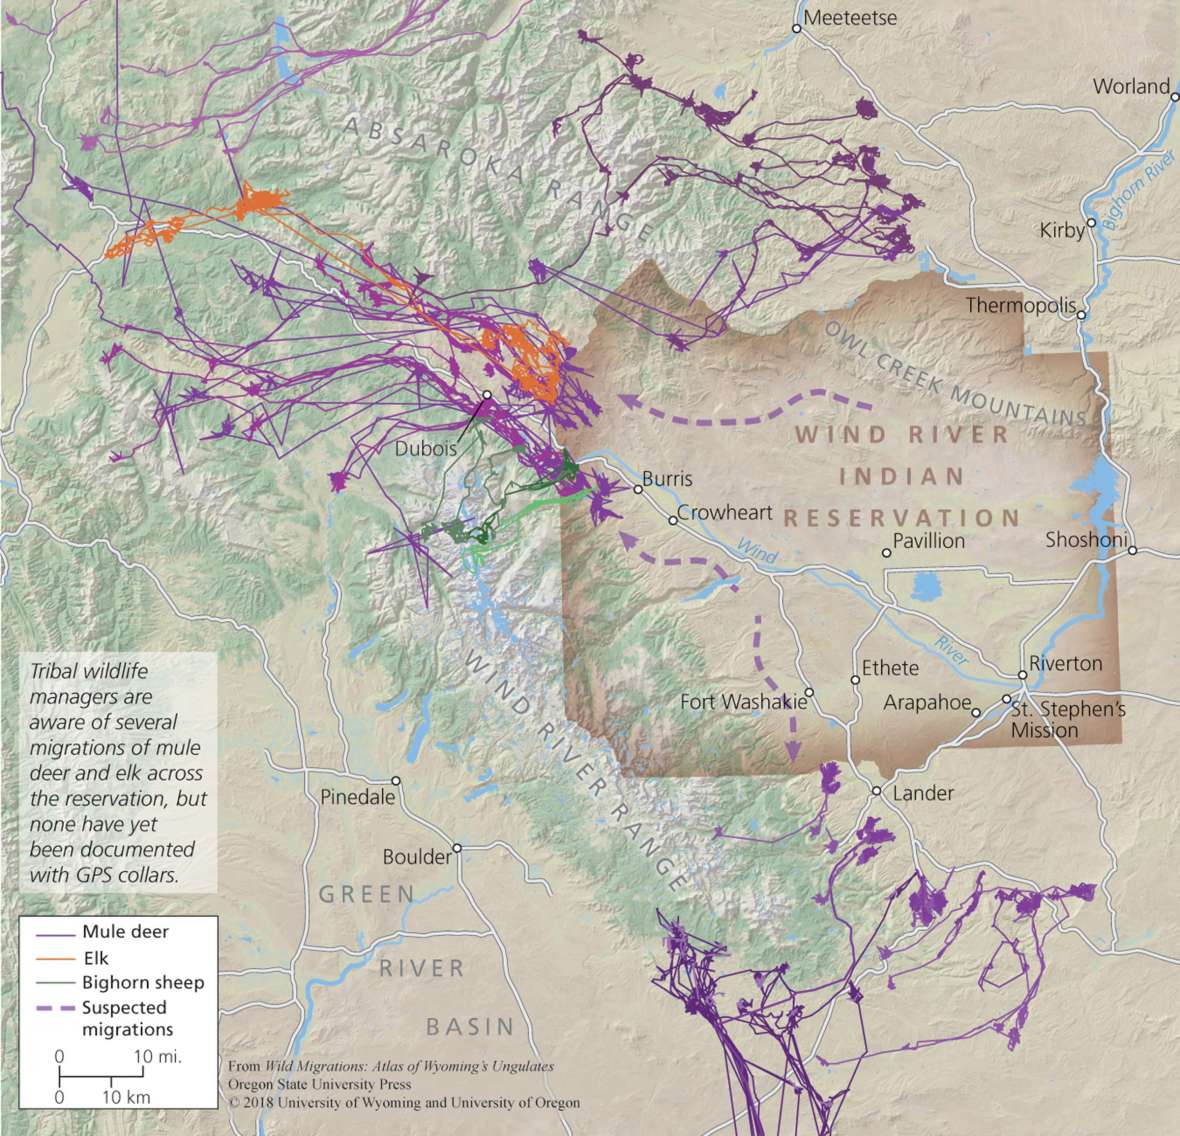 Animals find prime winter range in the foothills of the Owl Creek Mountains and Wind River Range, and summer in the adjacent mountains, sometimes undertaking long-distance migrations north to the Absaroka Range or west to the Gros Ventre Range. A cooperative effort to study and map the mule deer and elk migrations of the Wind River Indian Reservation began in 2018. Map from Wild Migrations: Atlas of Wyoming’s Ungulates, Oregon State University Press © 2018 University of Wyoming and University of Oregon.